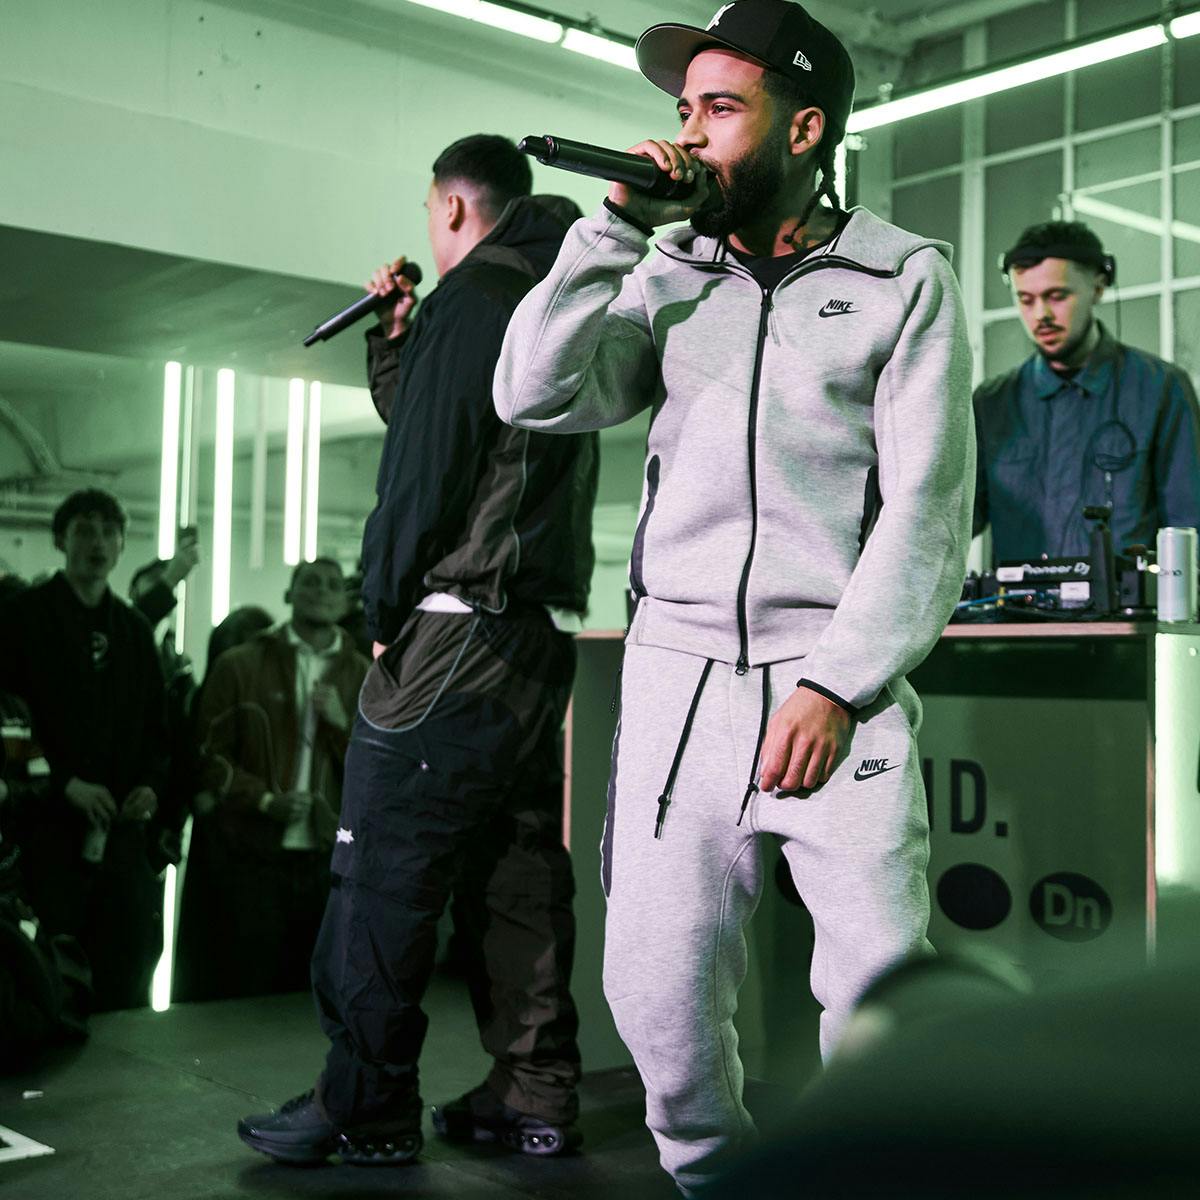 THE AIR MAX DN 2024 PRESENTED BY SneakersbeShops — EVENT RECAP